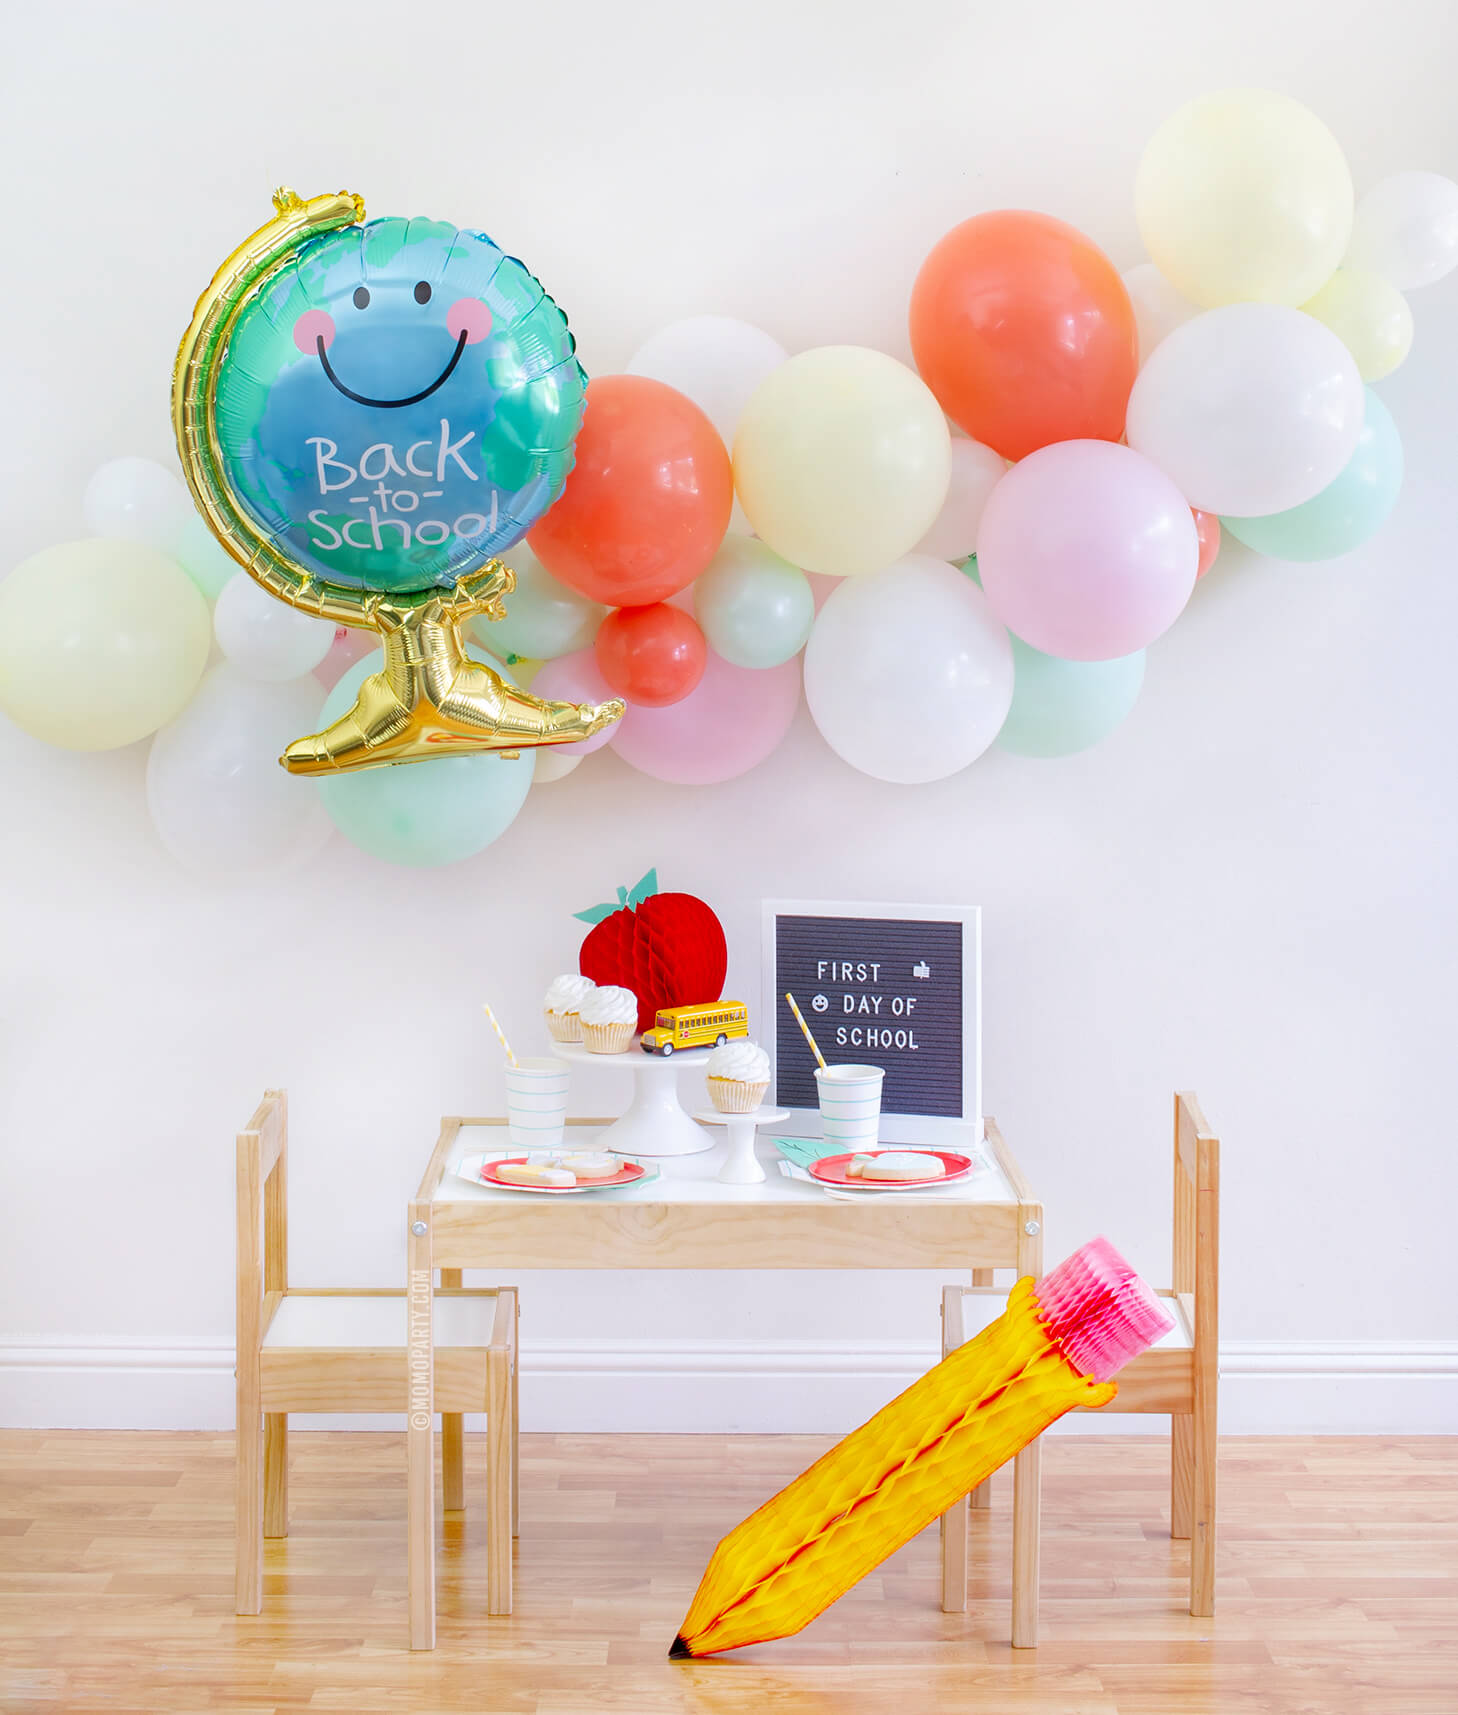 Momo party Back To School Party Box with Anagram Back To School Globe Foil Mylar Balloon, 6ft long Balloon Garland Assorted in Pastel Yellow, Pink, Mint, Carol, White Latex Balloon for Backdrop decoration, Letter board with "First Day of School" sign, Oh happy day Cherry Red side plate, Aqua Striped Large Plates and cups, Leaf Napkins as tableware, Honeycomb Apple, cupcakes, and school bus toy on cake stand for a Modern Back to school Party Celebration